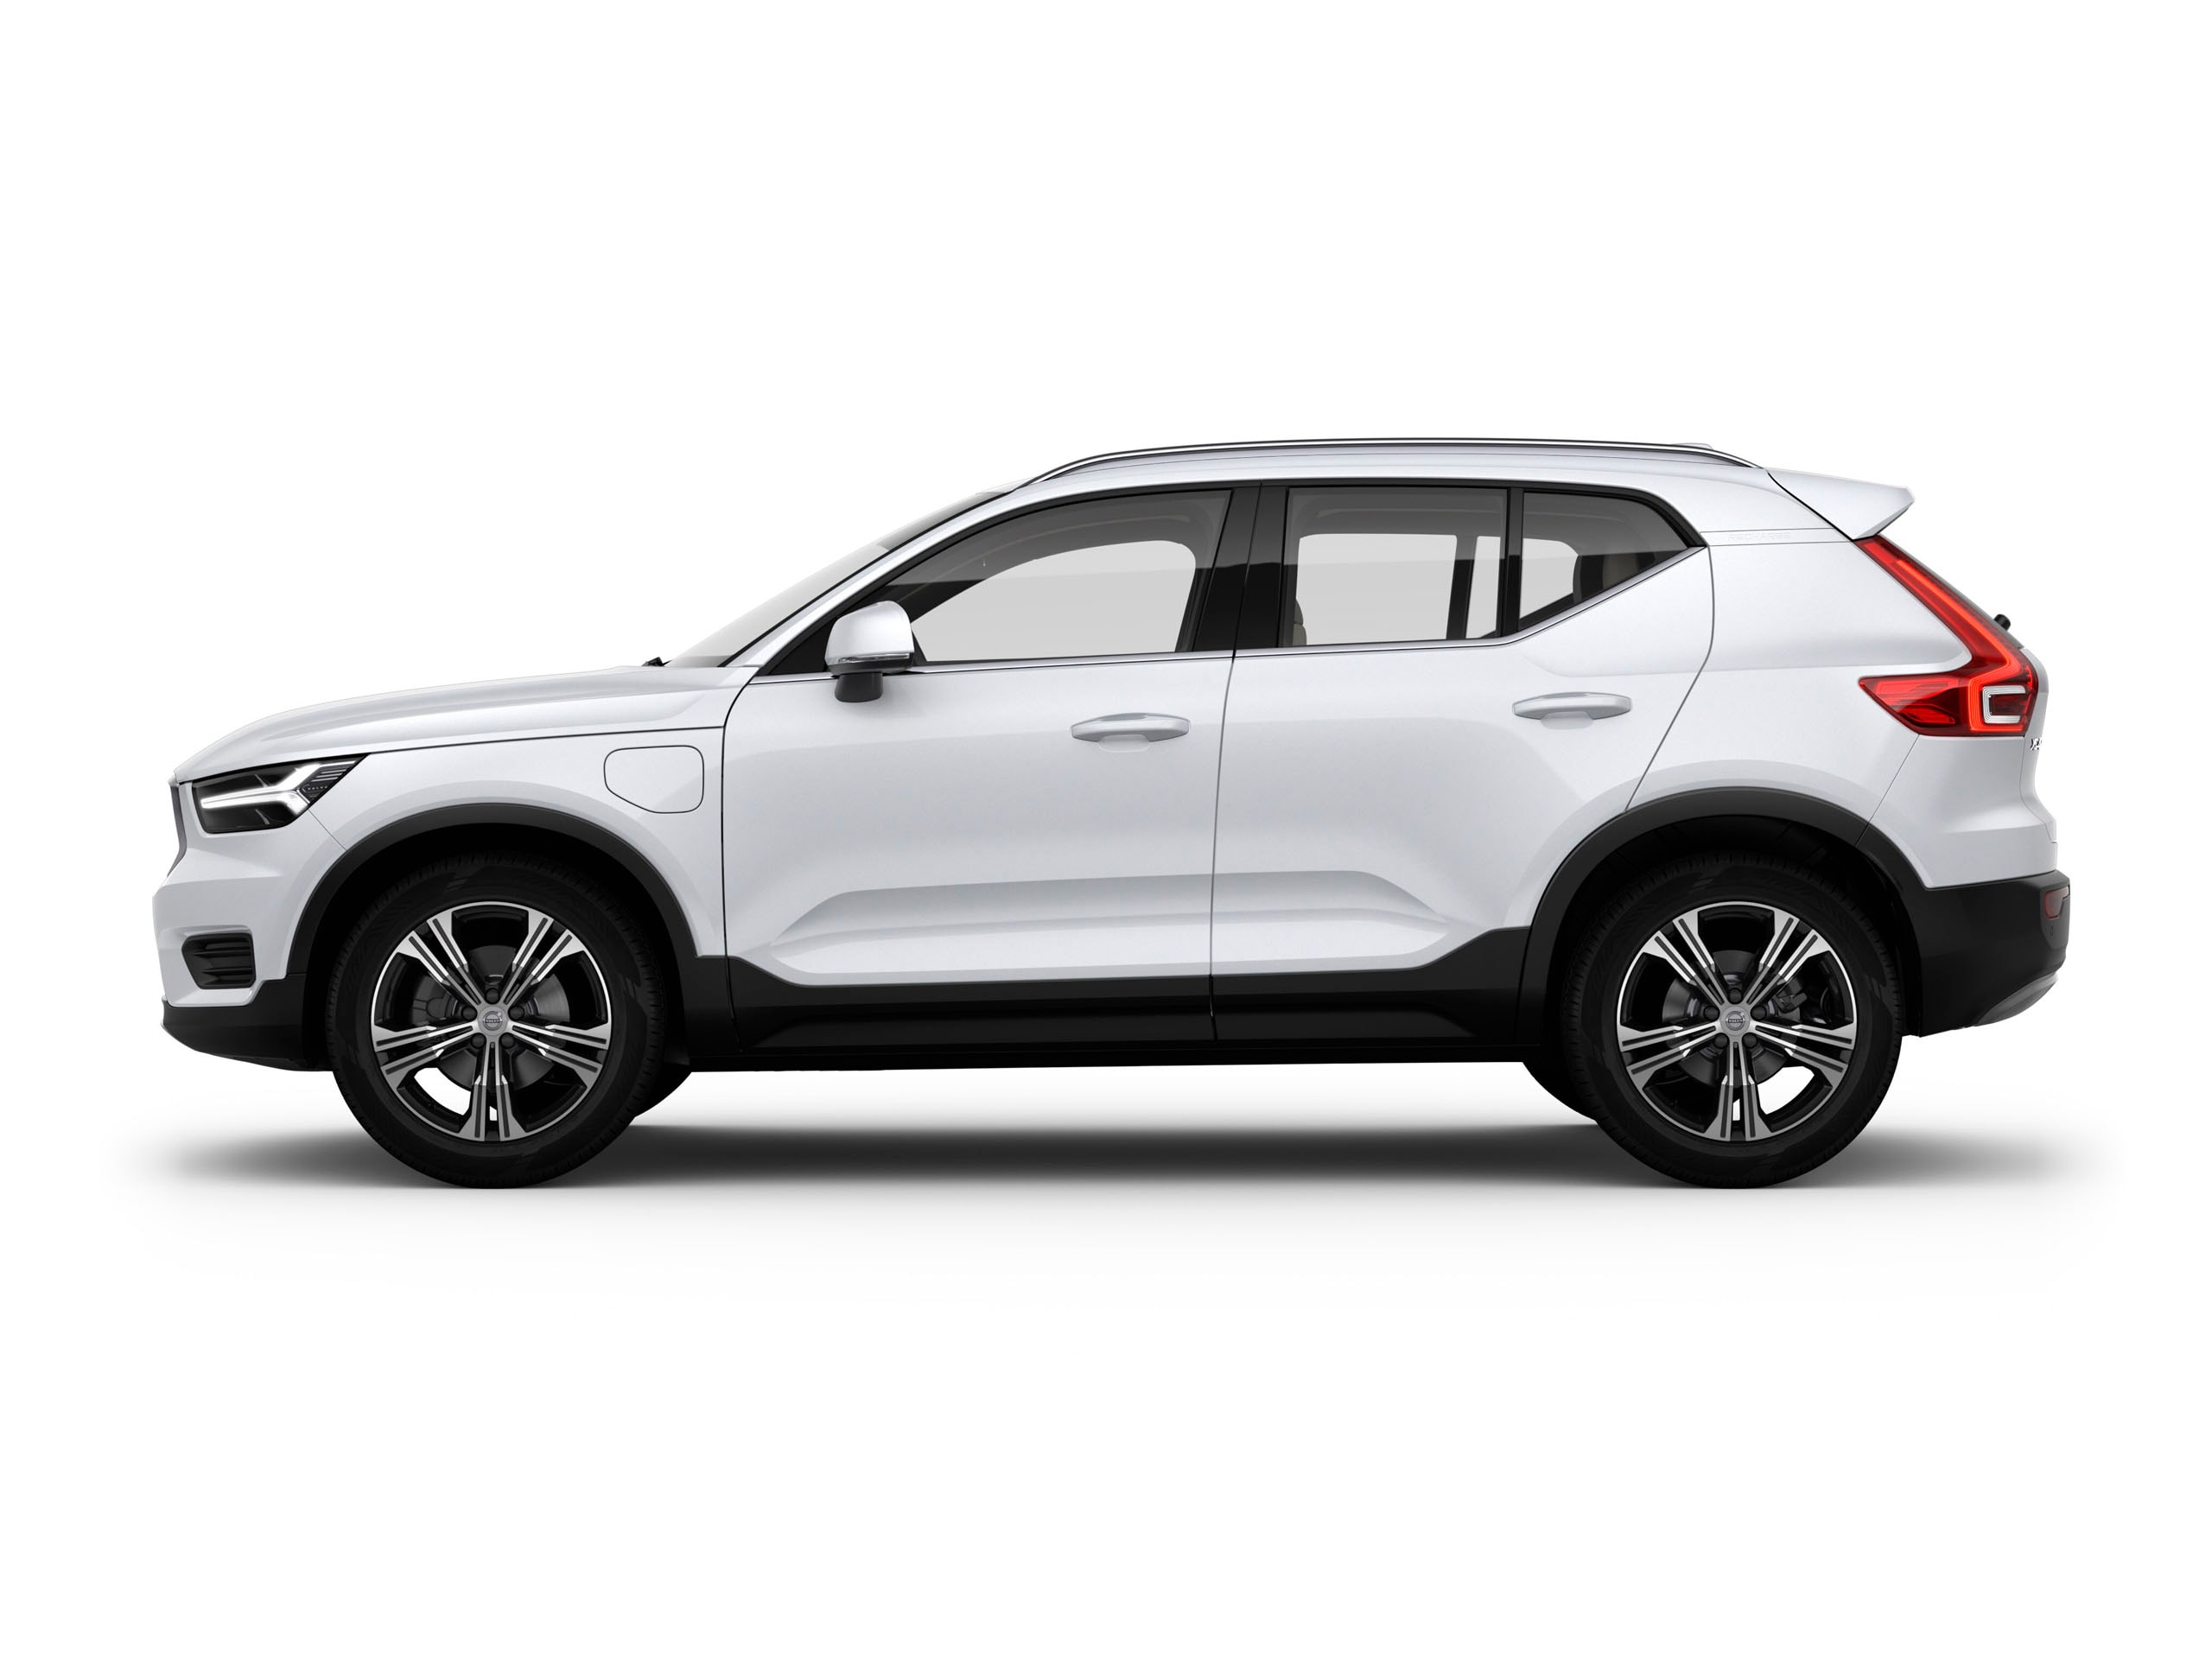 Volvo XC40 Recharge enchufable vista lateral color blanco